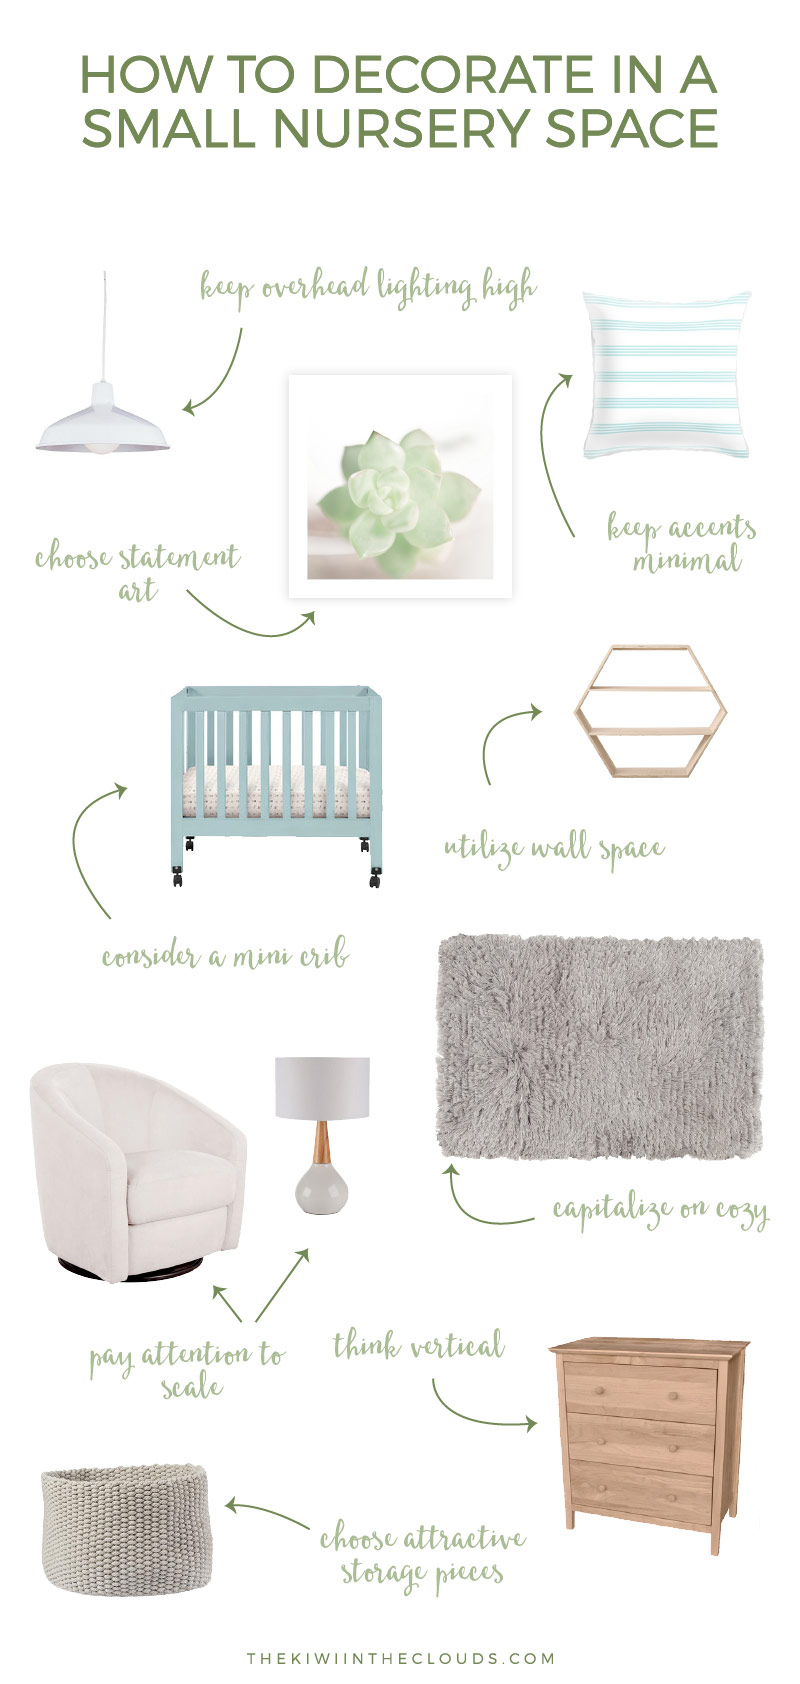 Are you struggling to plan a small nursery for your baby, but you're stumped on how to maximize the space you have? Make it easier on yourself by learning these 9 simple steps to decorating a small nursery. 